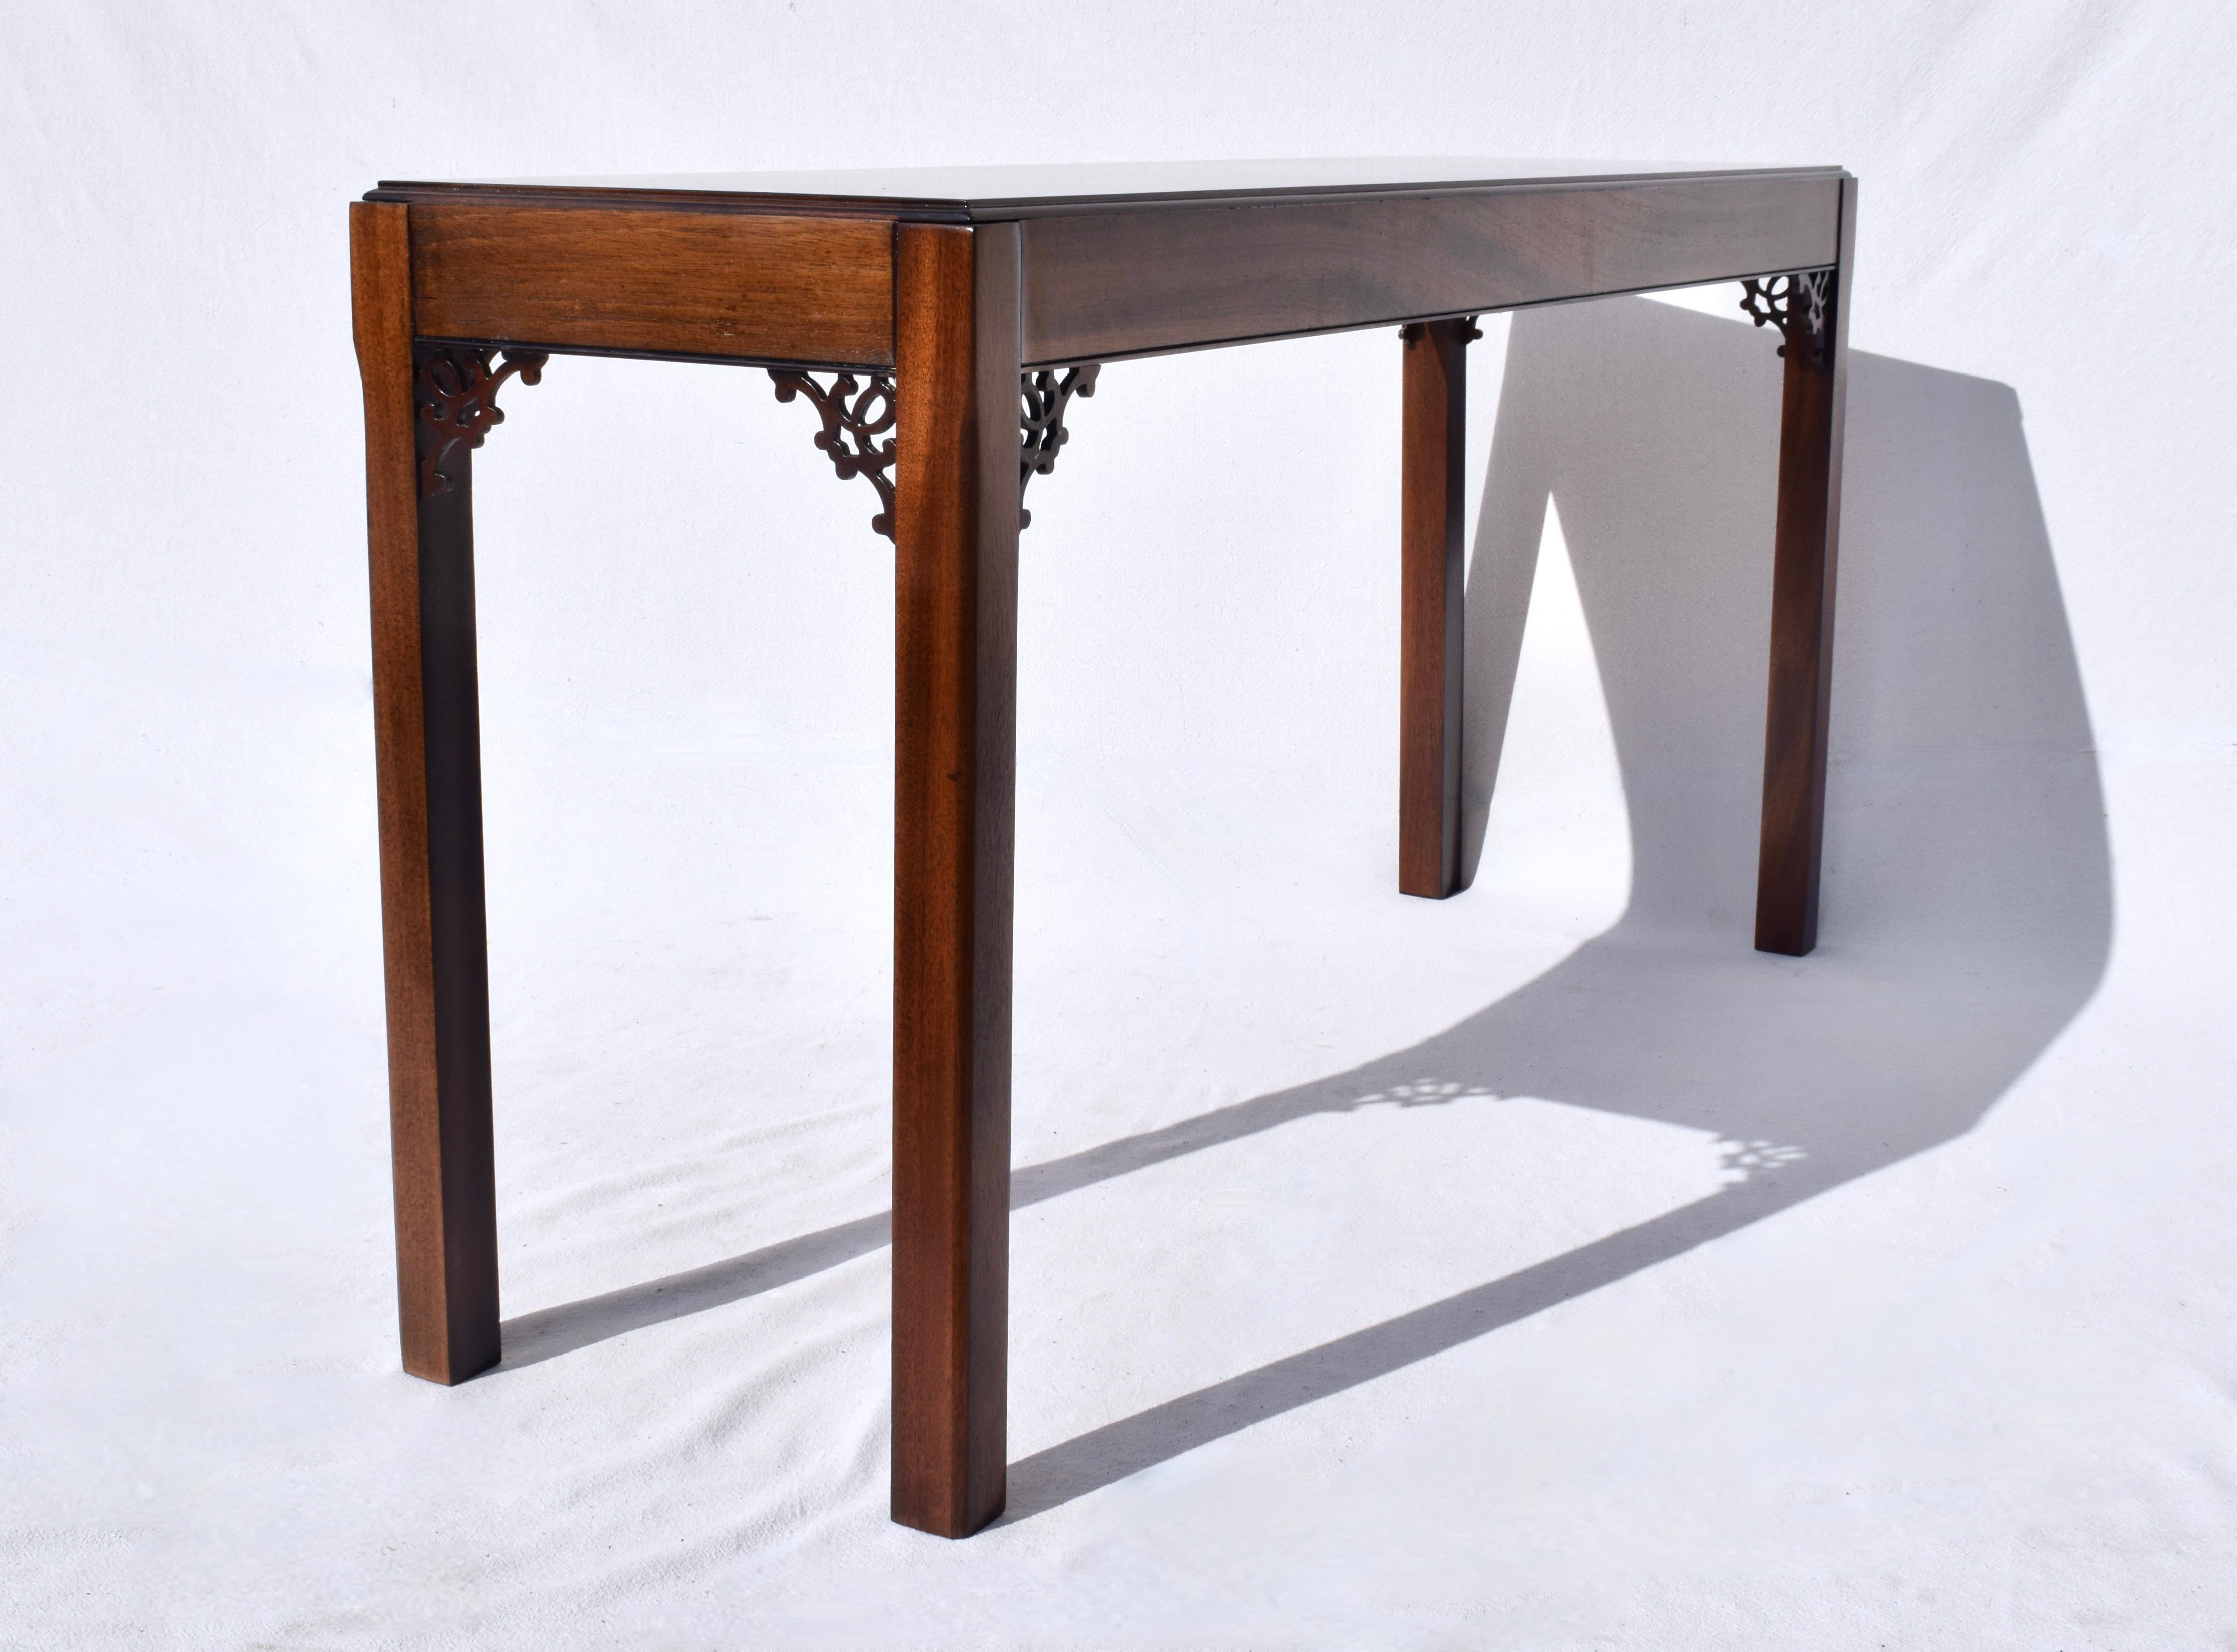 20th Century English Chippendale Mahogany Fret Work Console Table For Sale